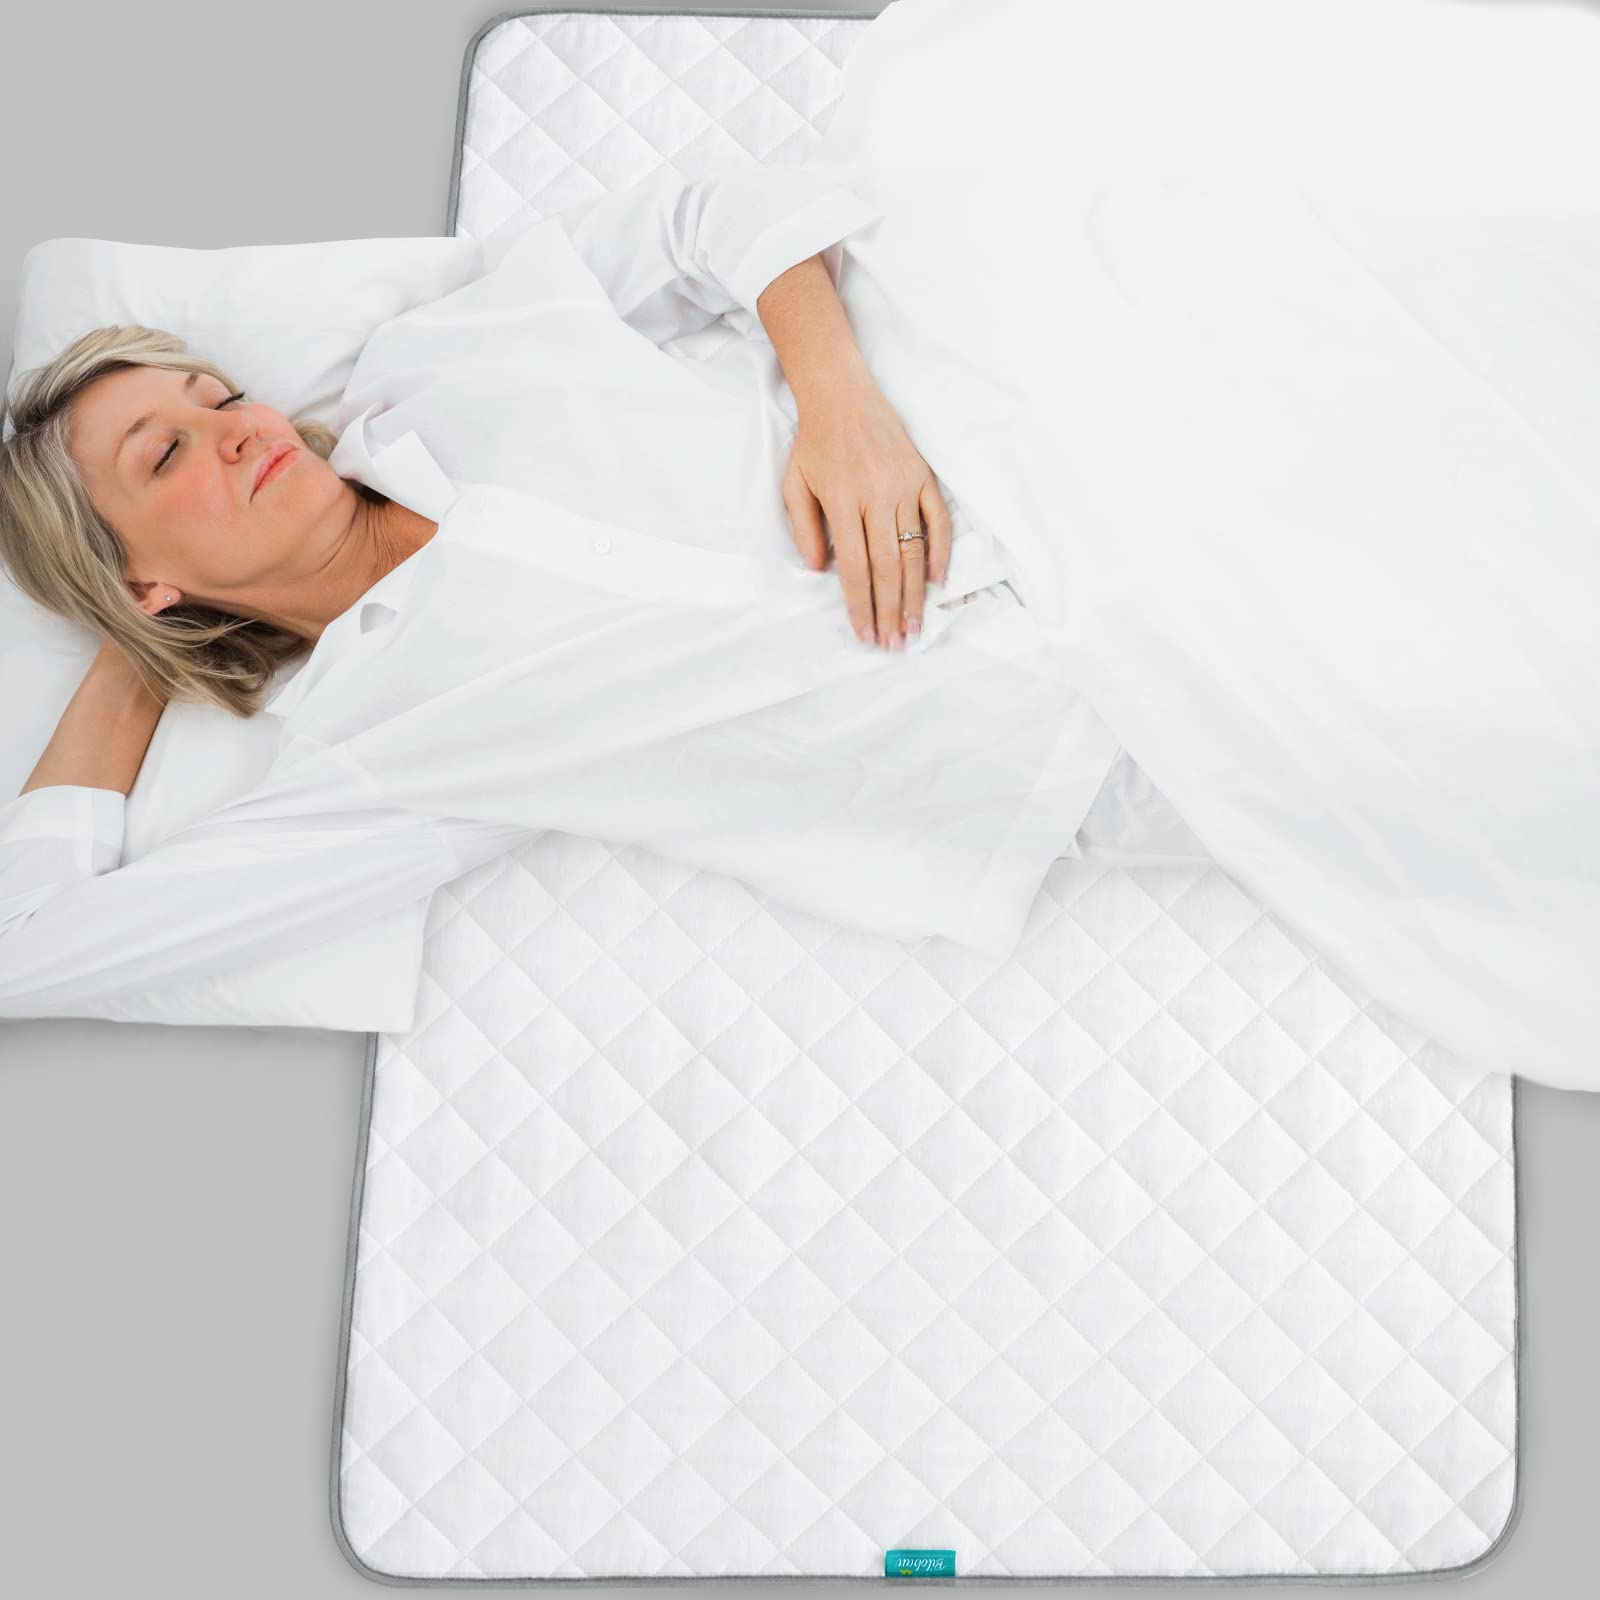 Bed Pads for Incontinence 34 x 52 Washable, Waterproof Adults